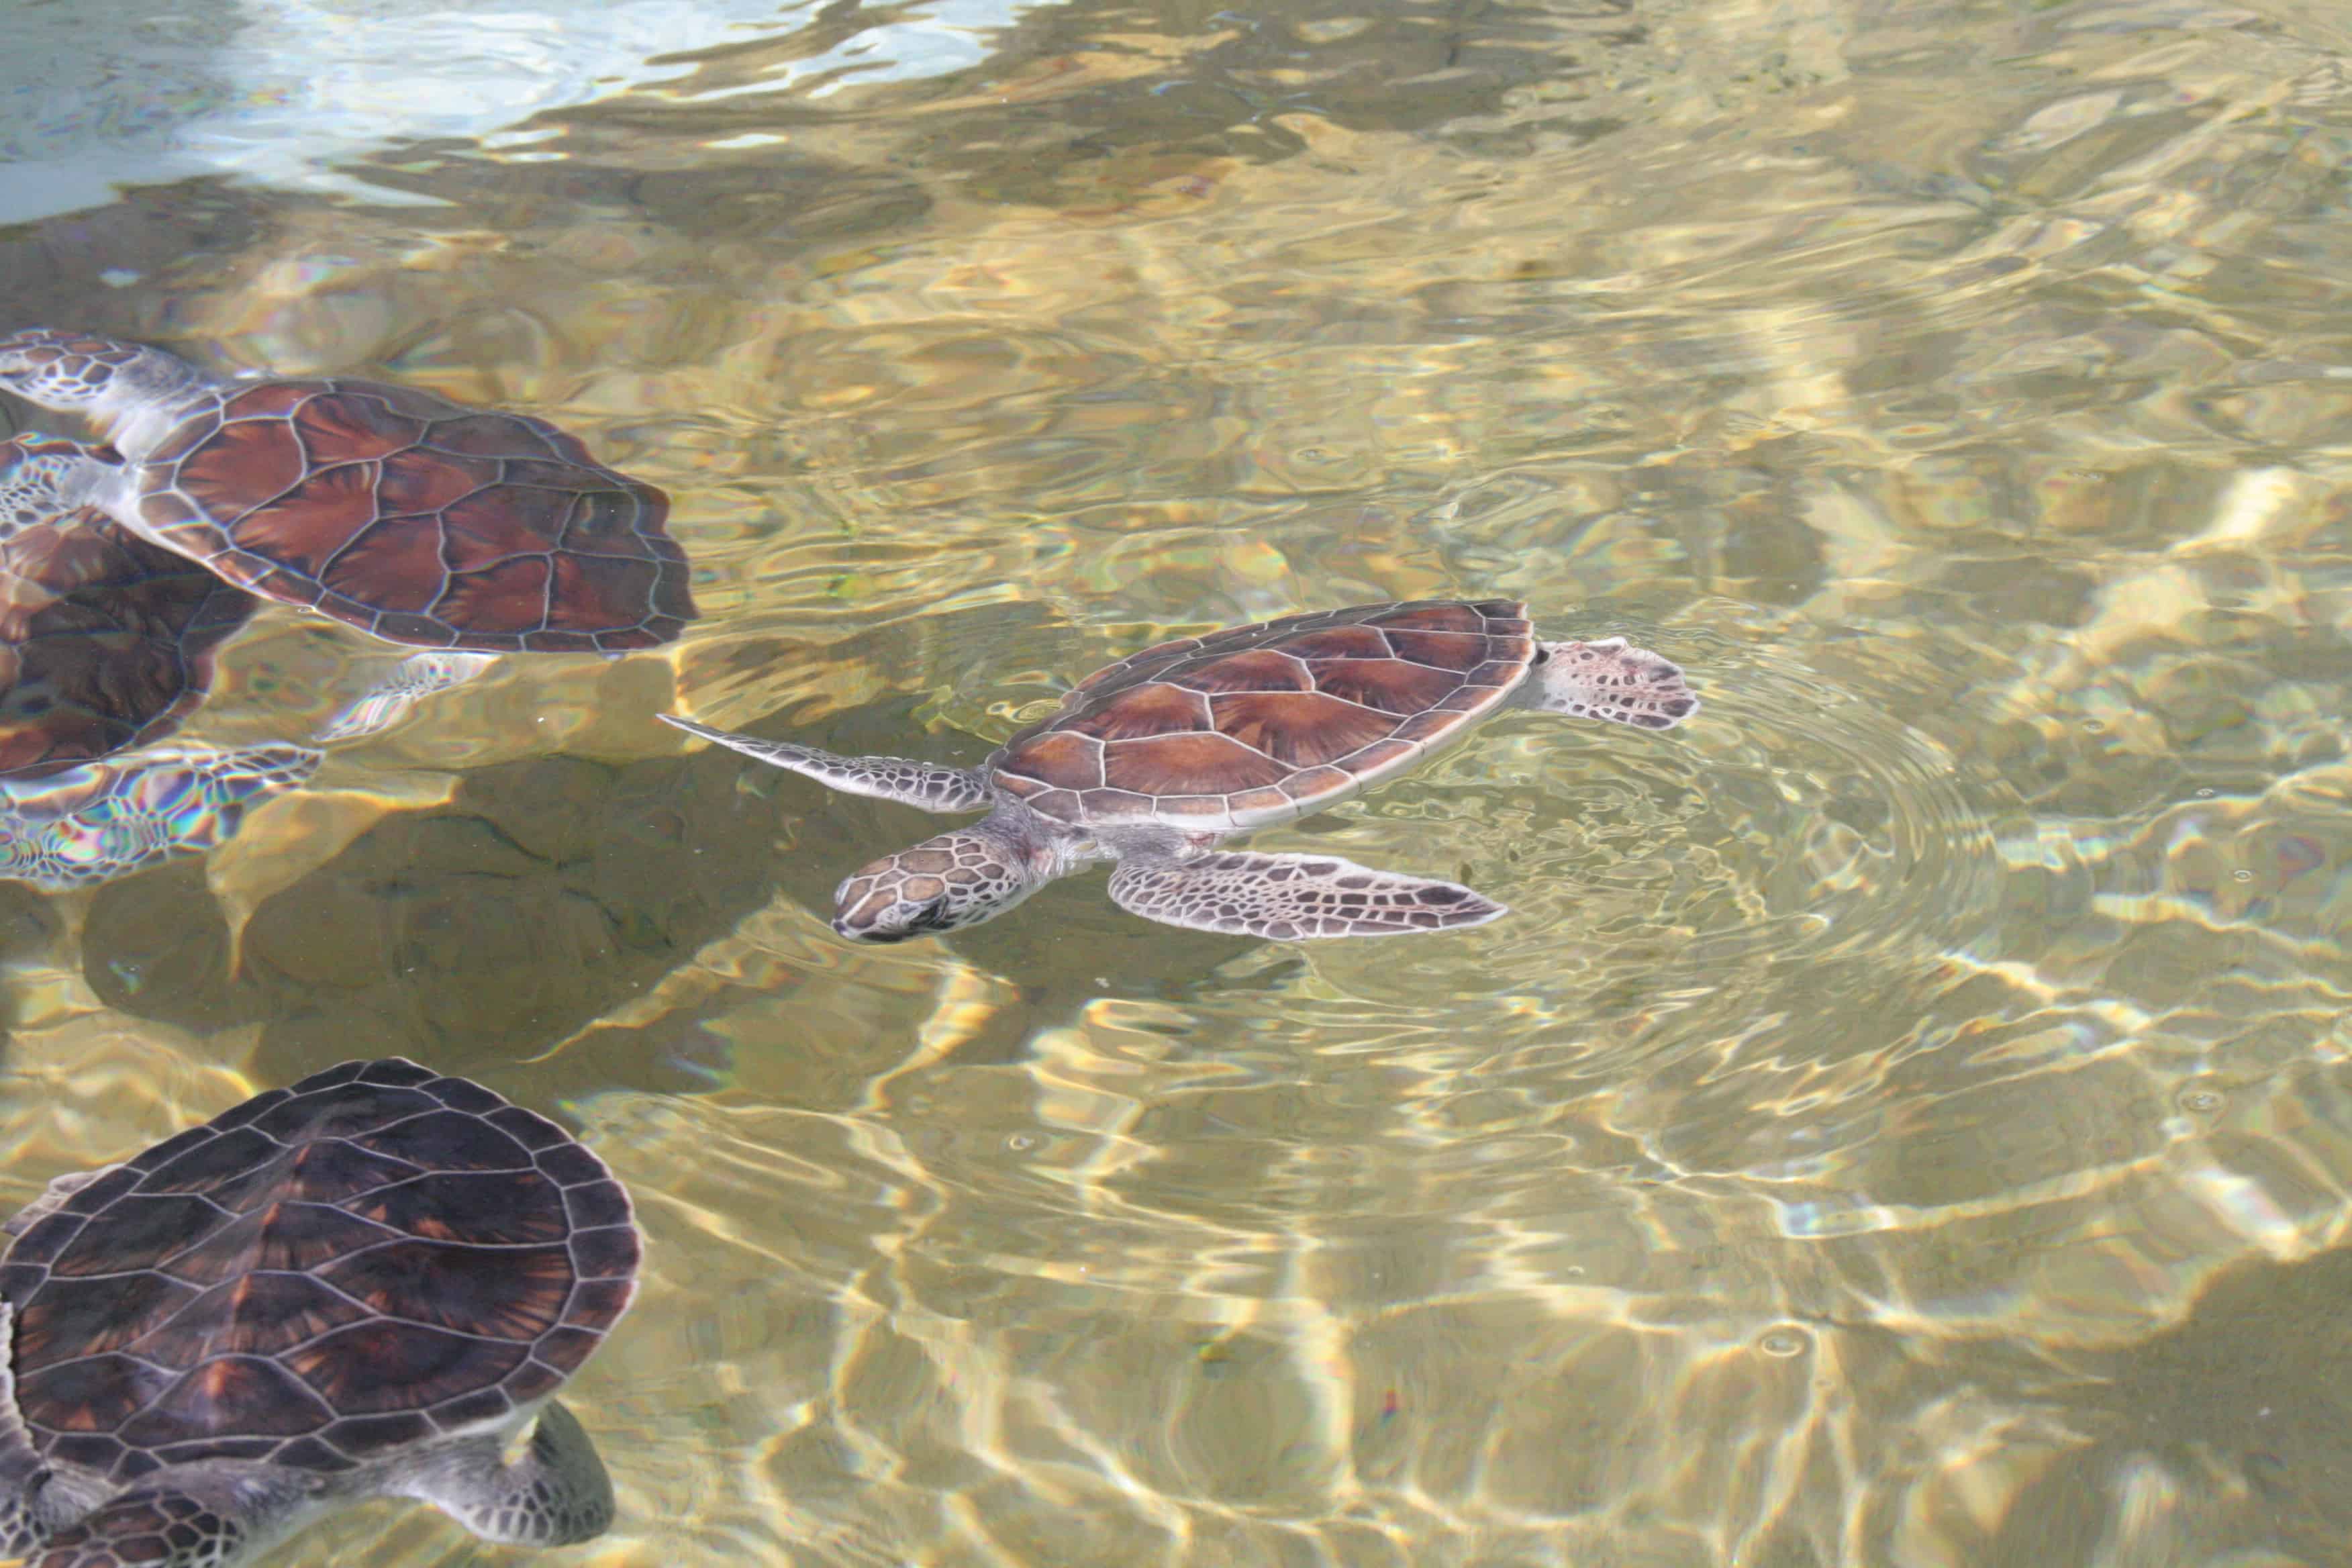 Green turtles at the Cayman turtle farm, an operation not free from controversy. Copyright: Dr Mike Pienkowski